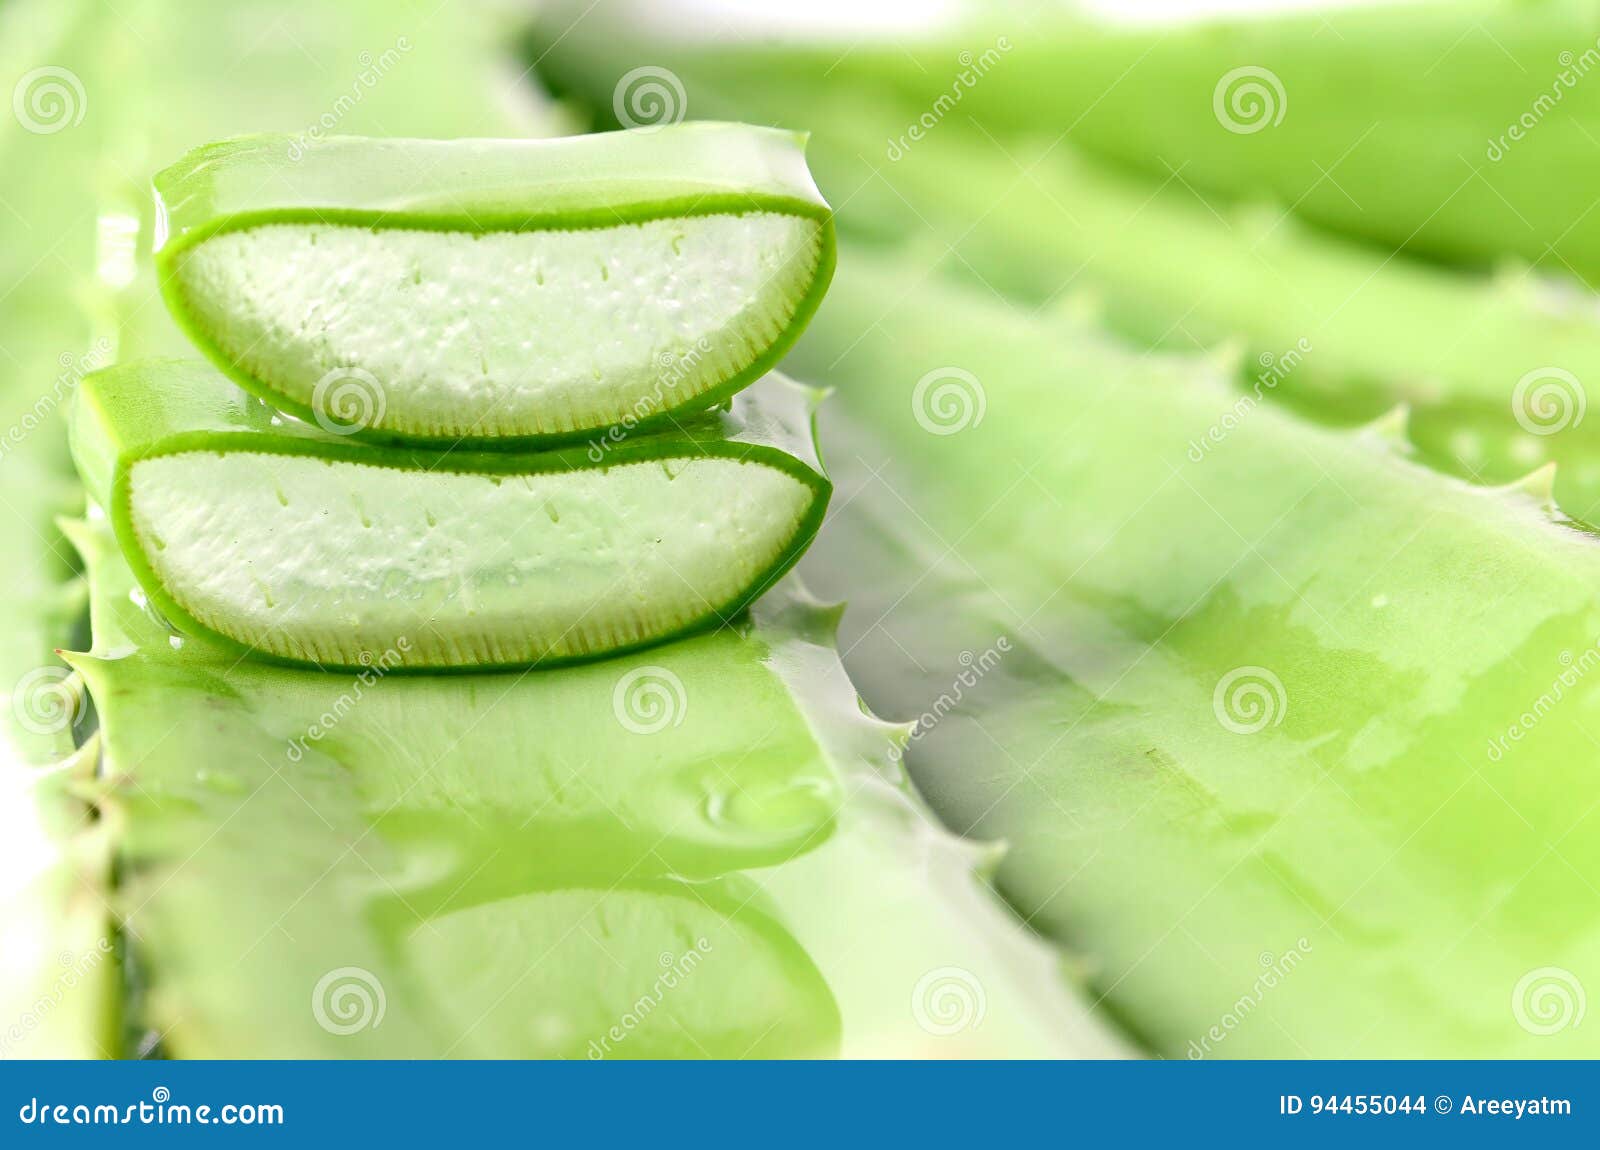 Cut Aloe Vera Leaves On Green Background Stock Photo Image Of